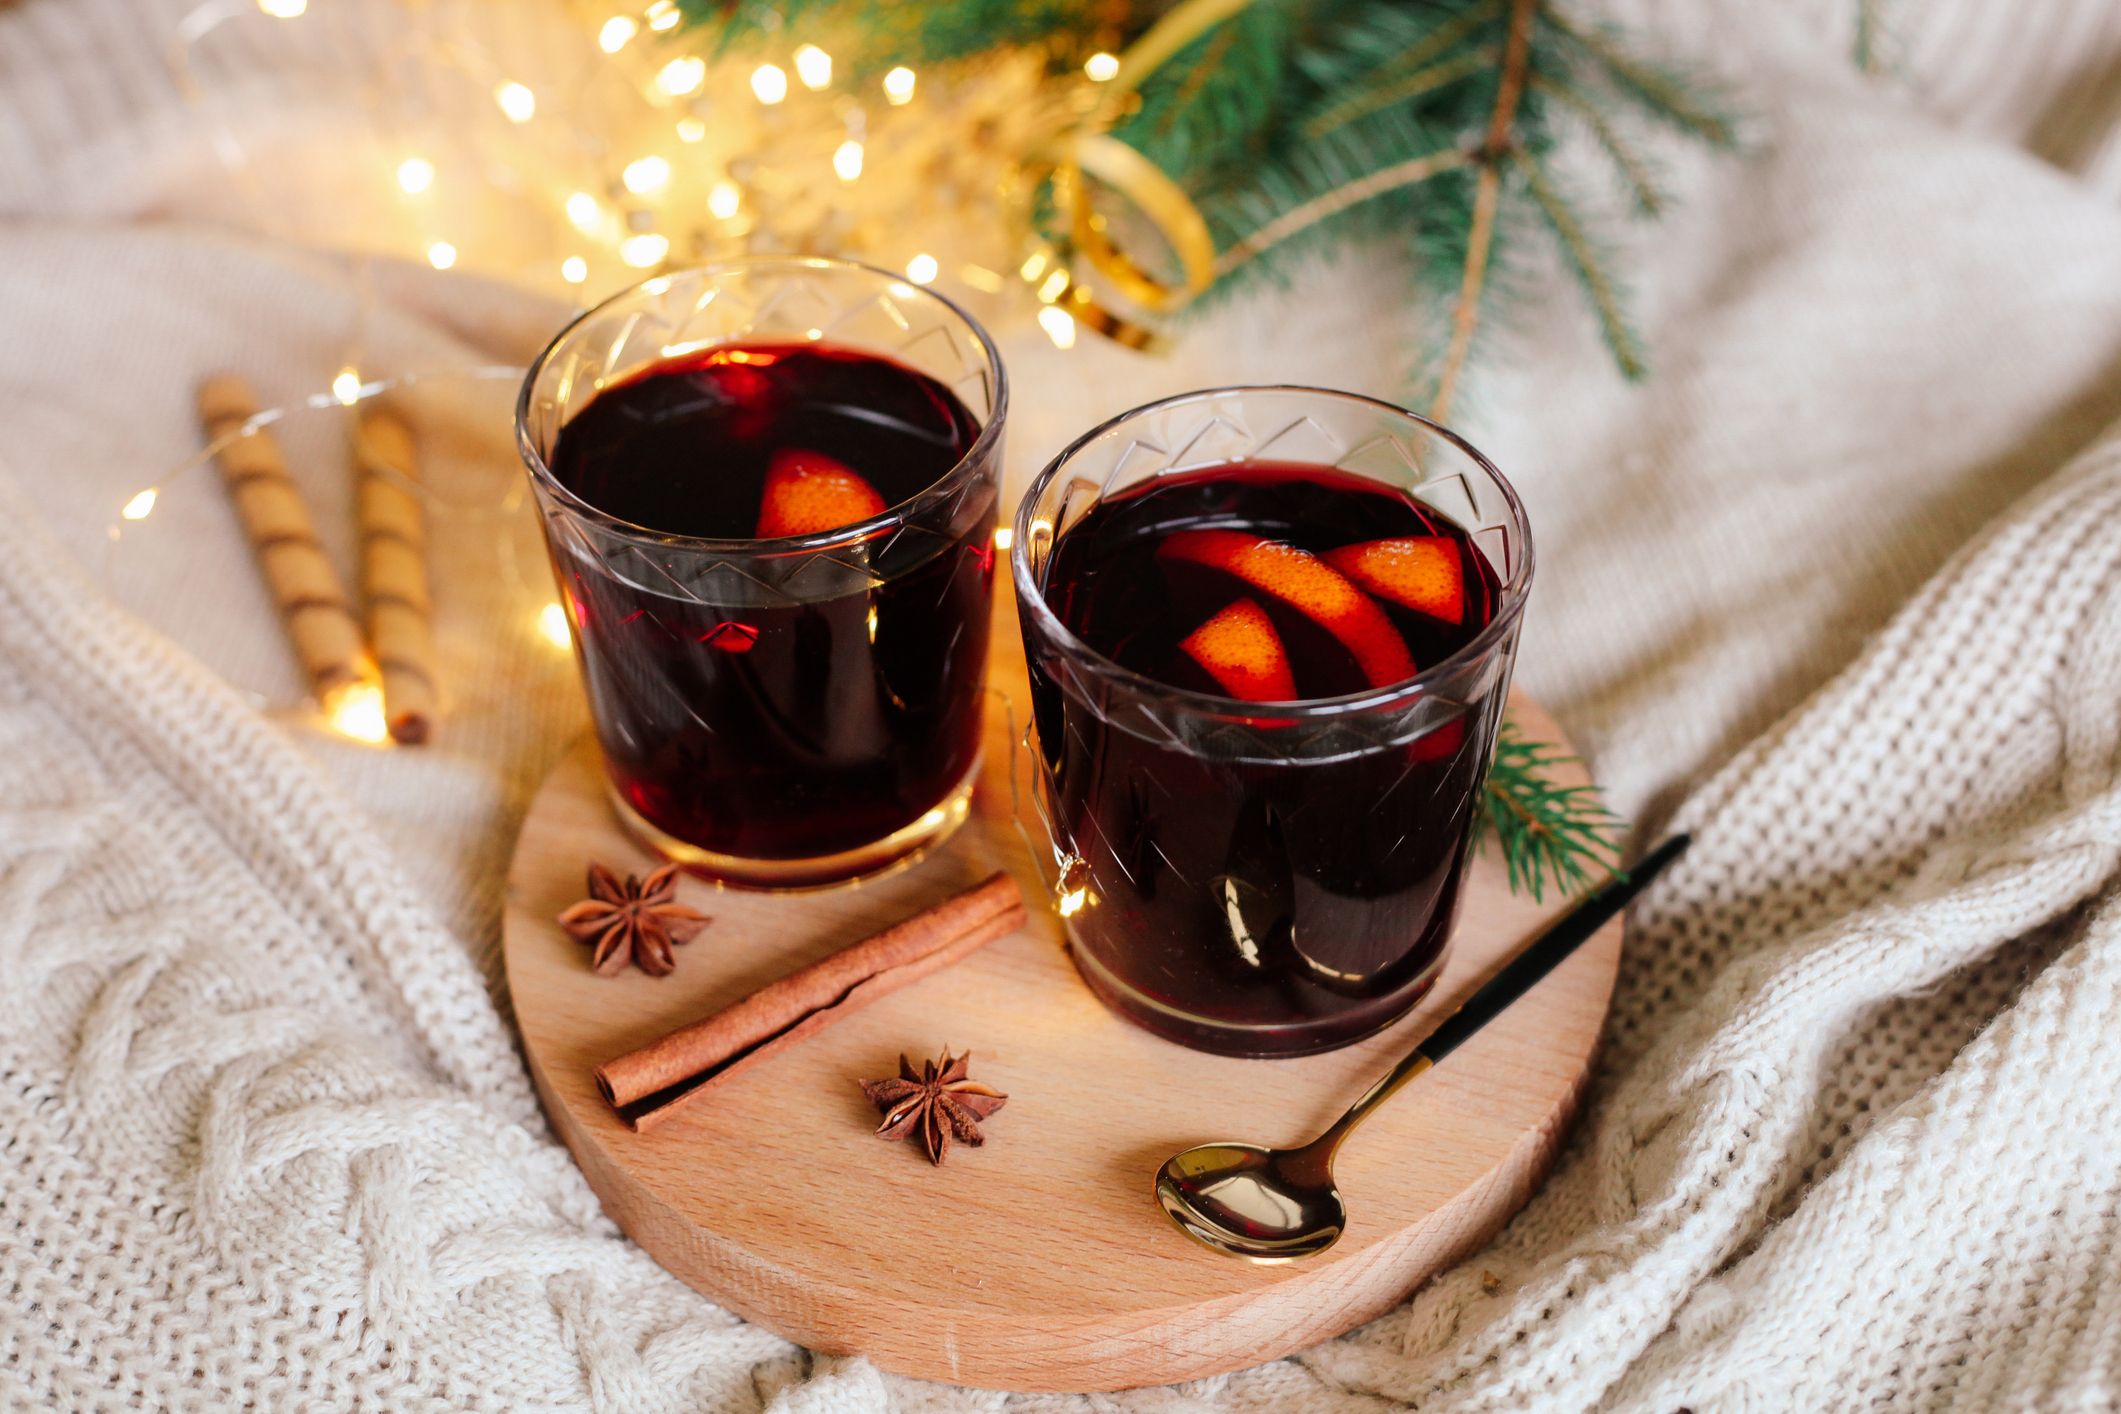 https://hips.hearstapps.com/hmg-prod/images/two-glasses-with-hot-winter-drink-mulled-red-wine-royalty-free-image-1664370861.jpg